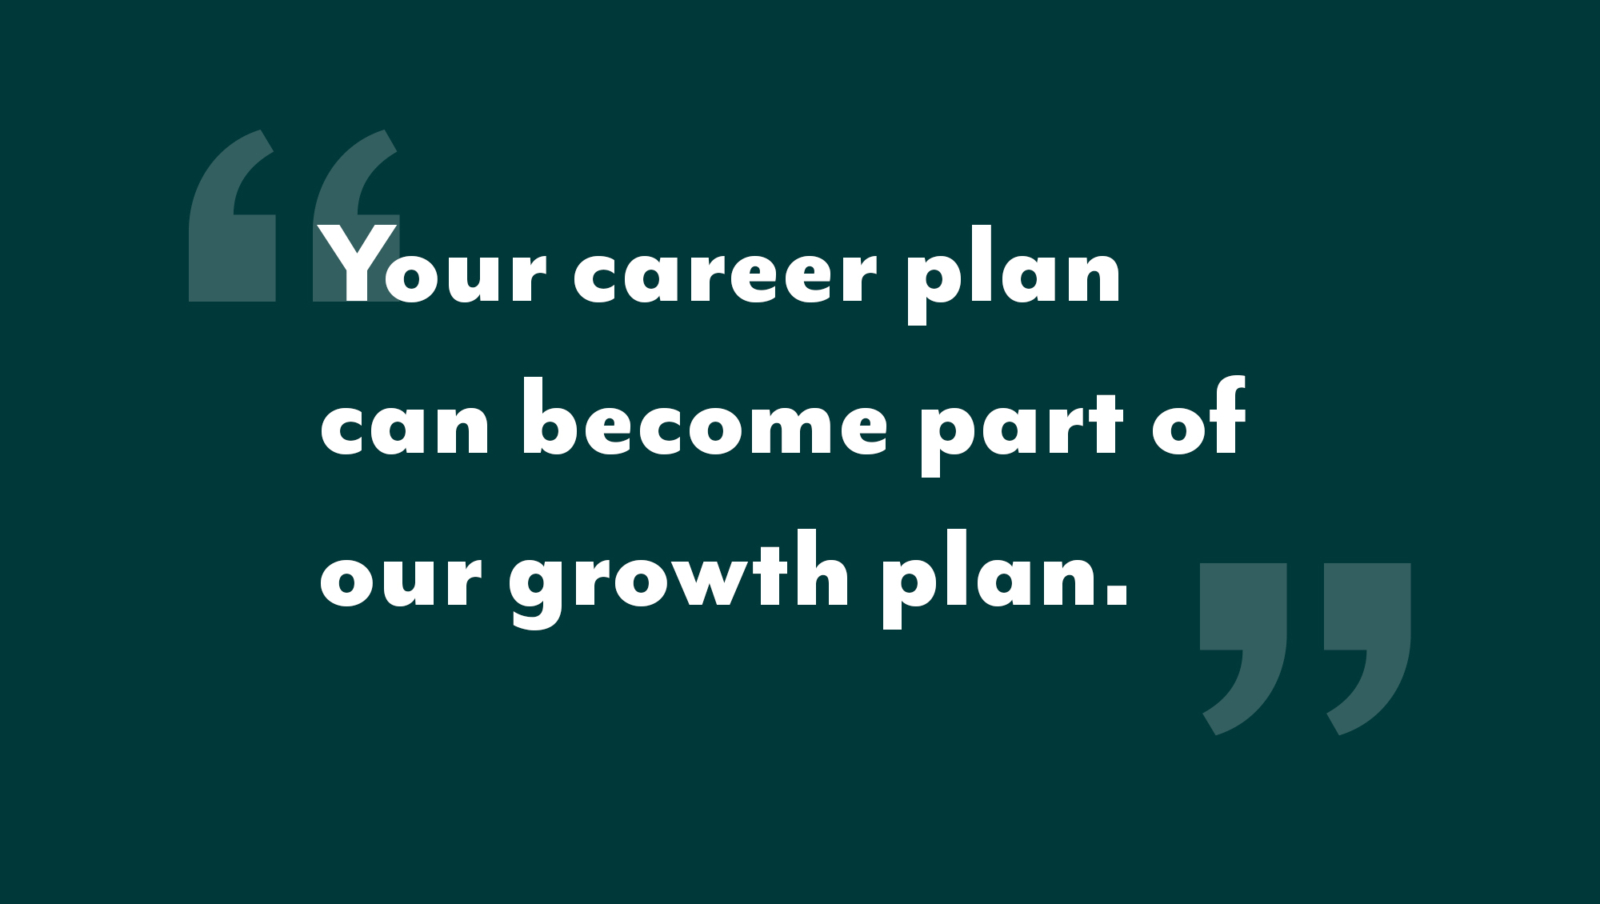 The image says Your career plan can become part of our growth plan